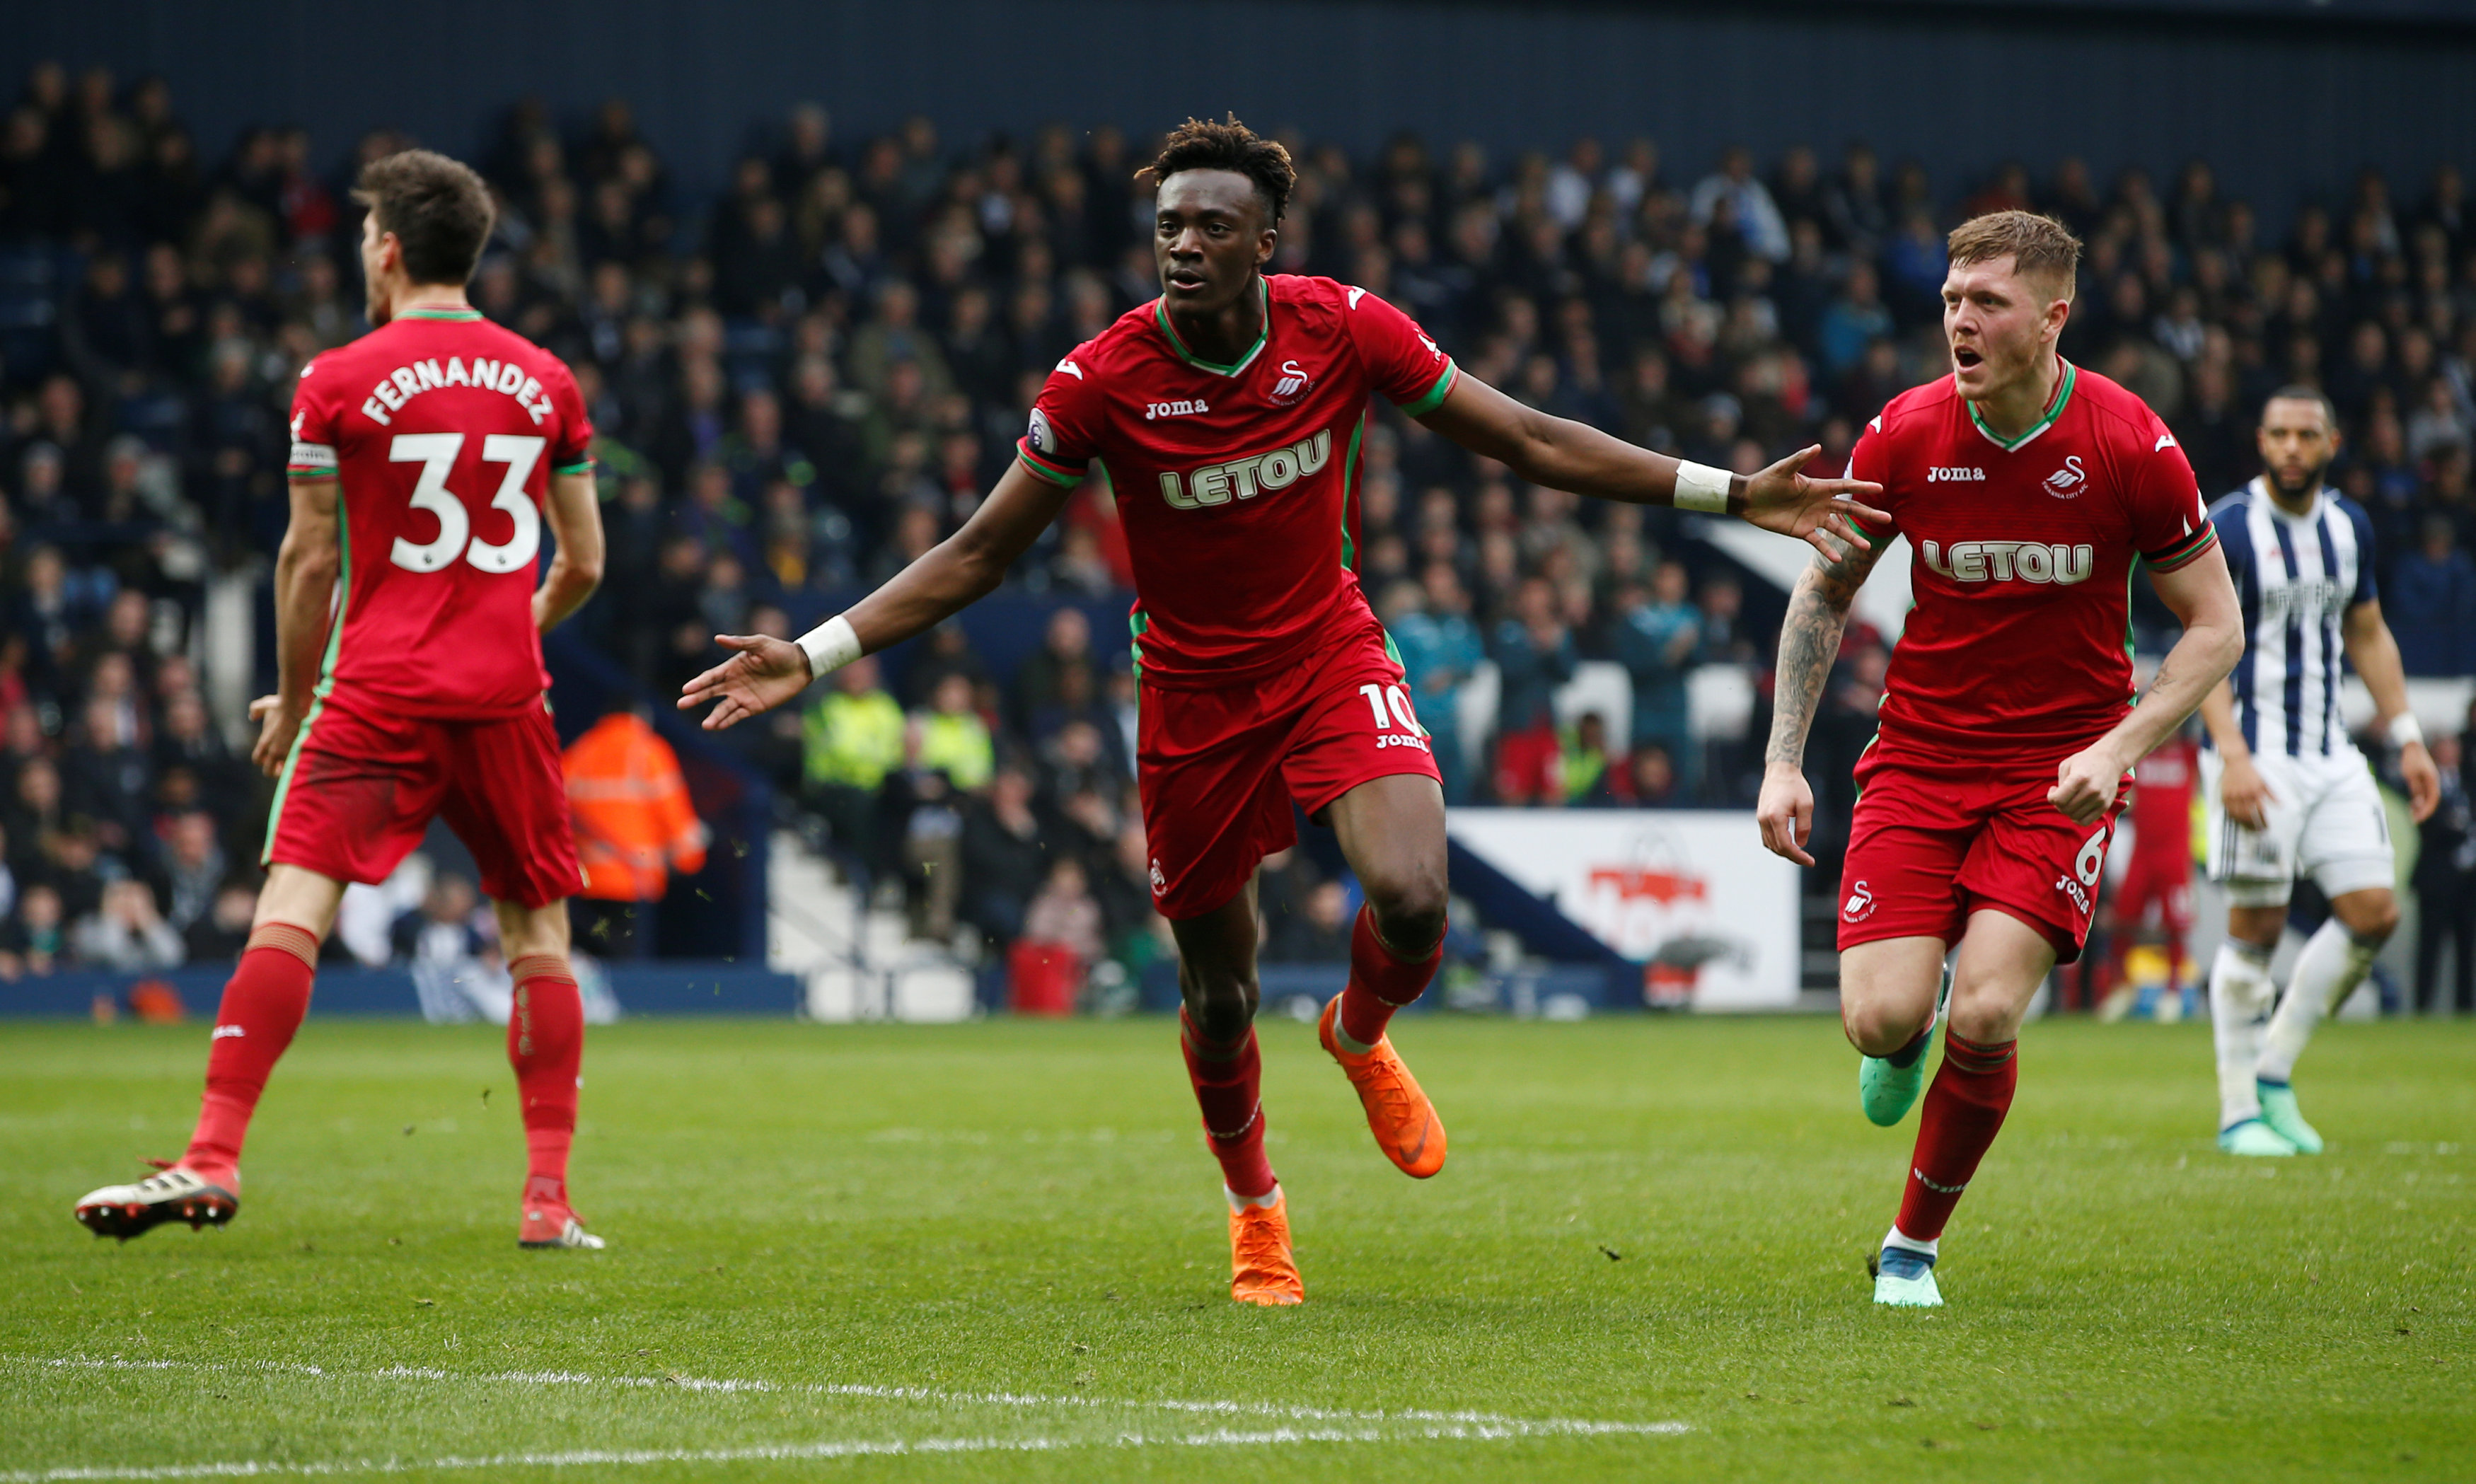 Football: Abraham strikes as Swansea hold West Brom